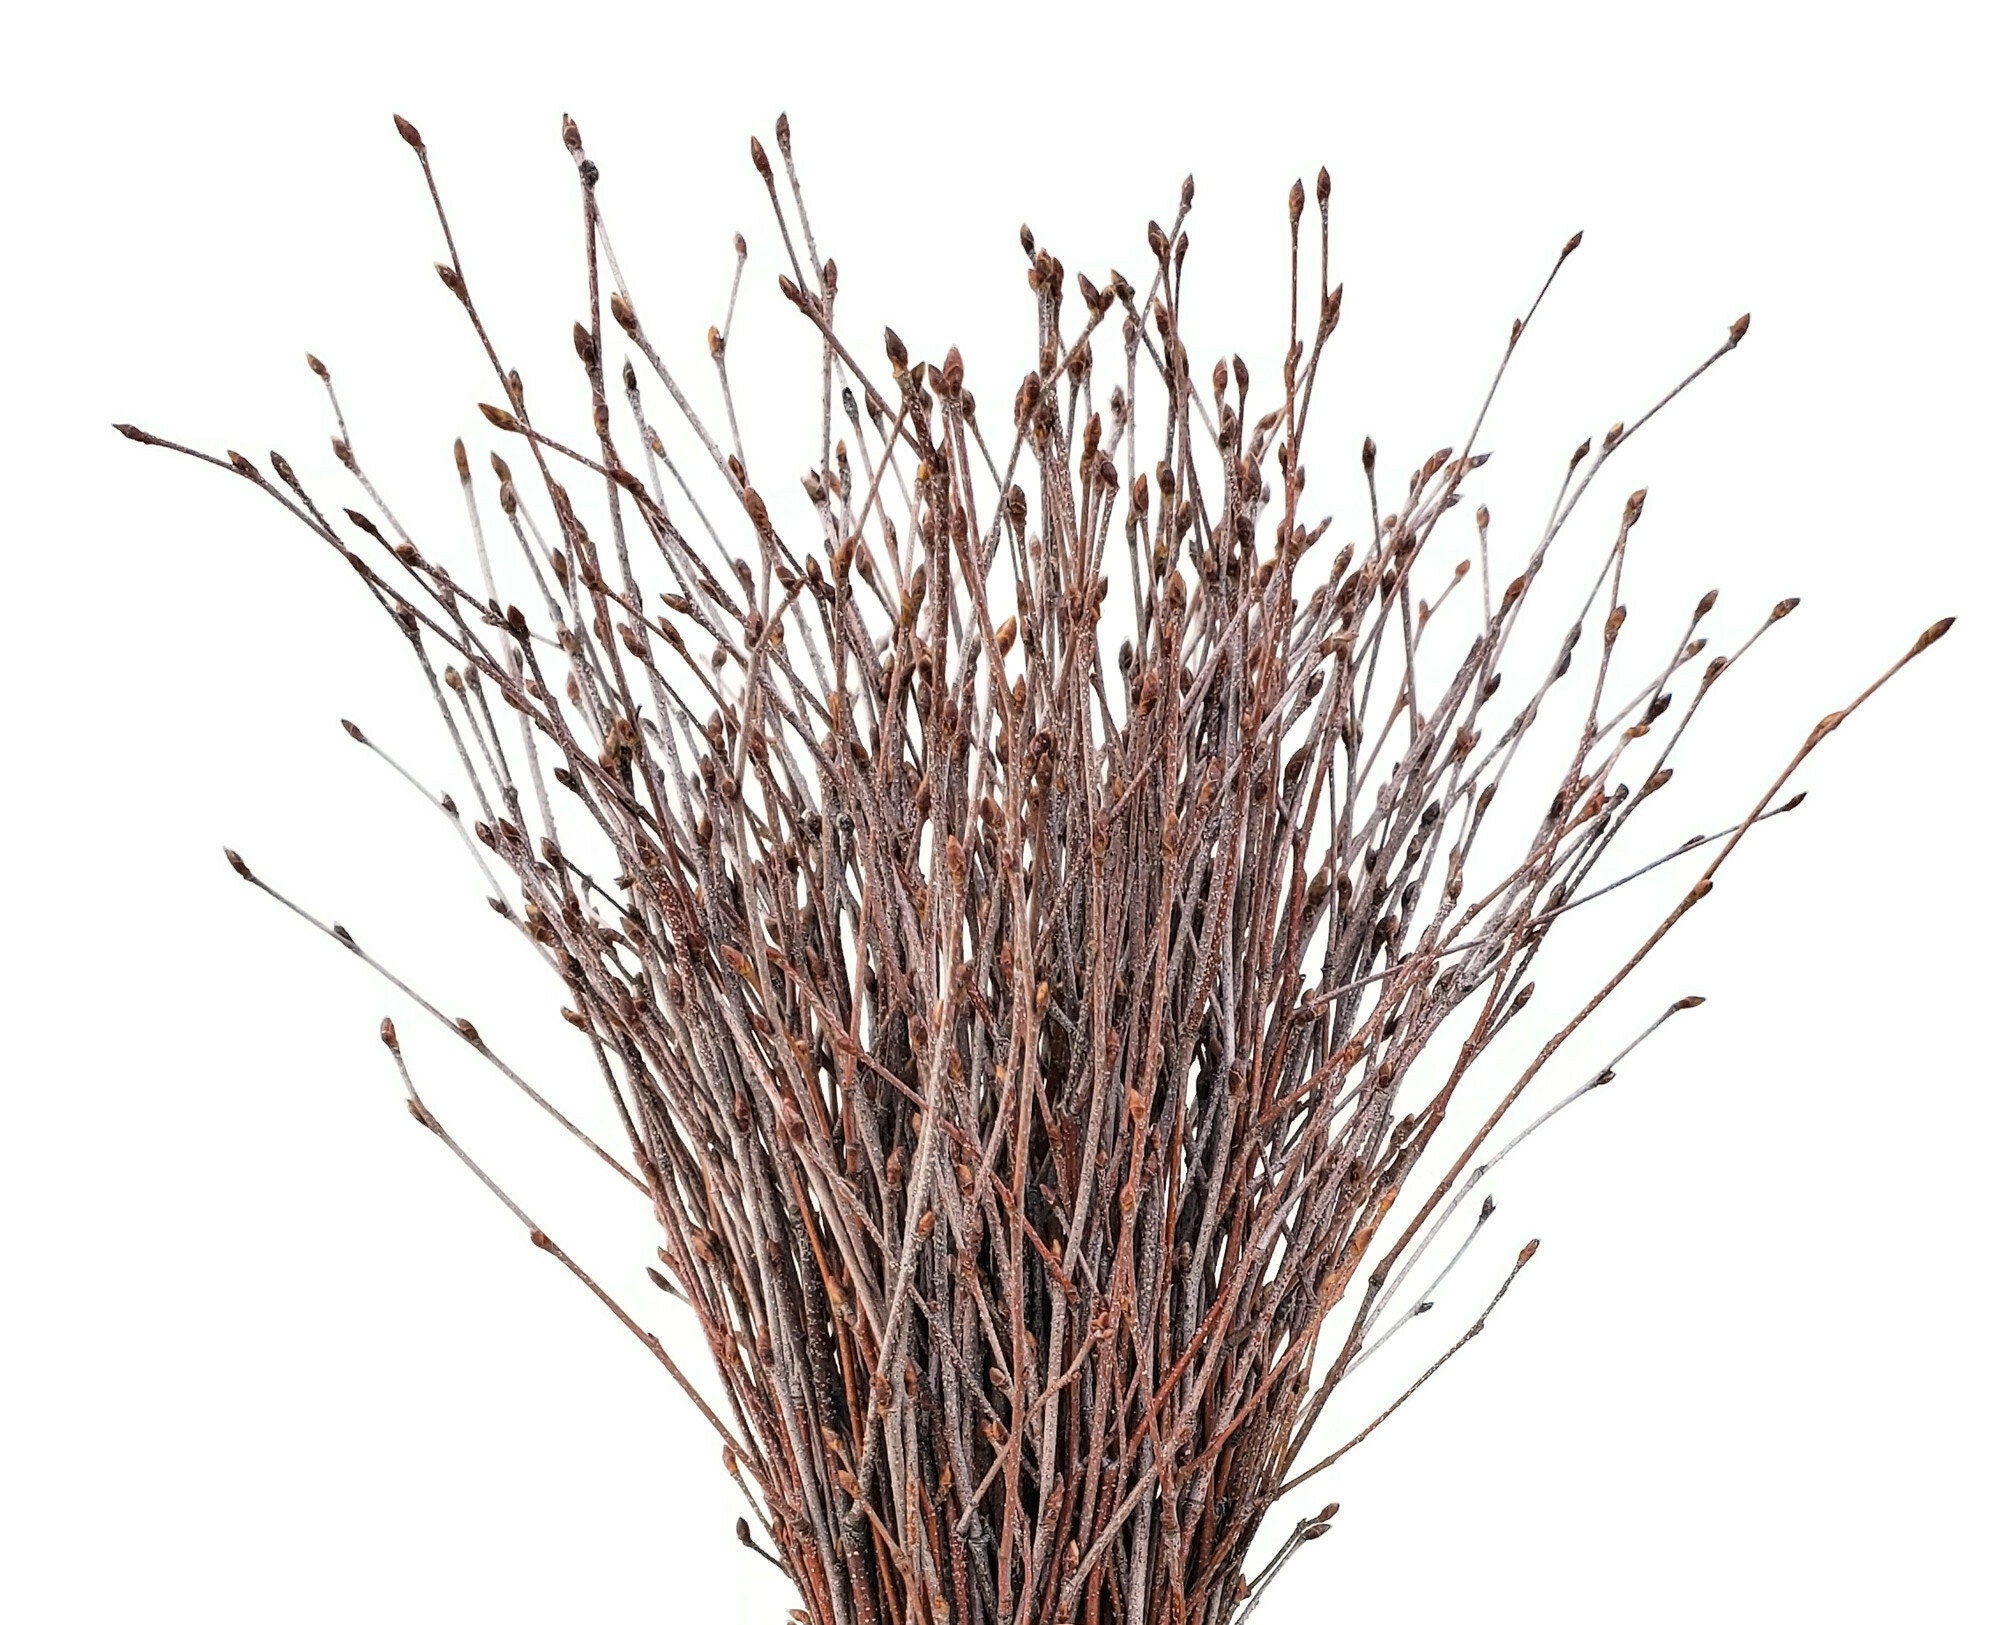 Small Natural Birch Branch Tips 8-12. Pack of 40 tips for Floral and Craft  Application